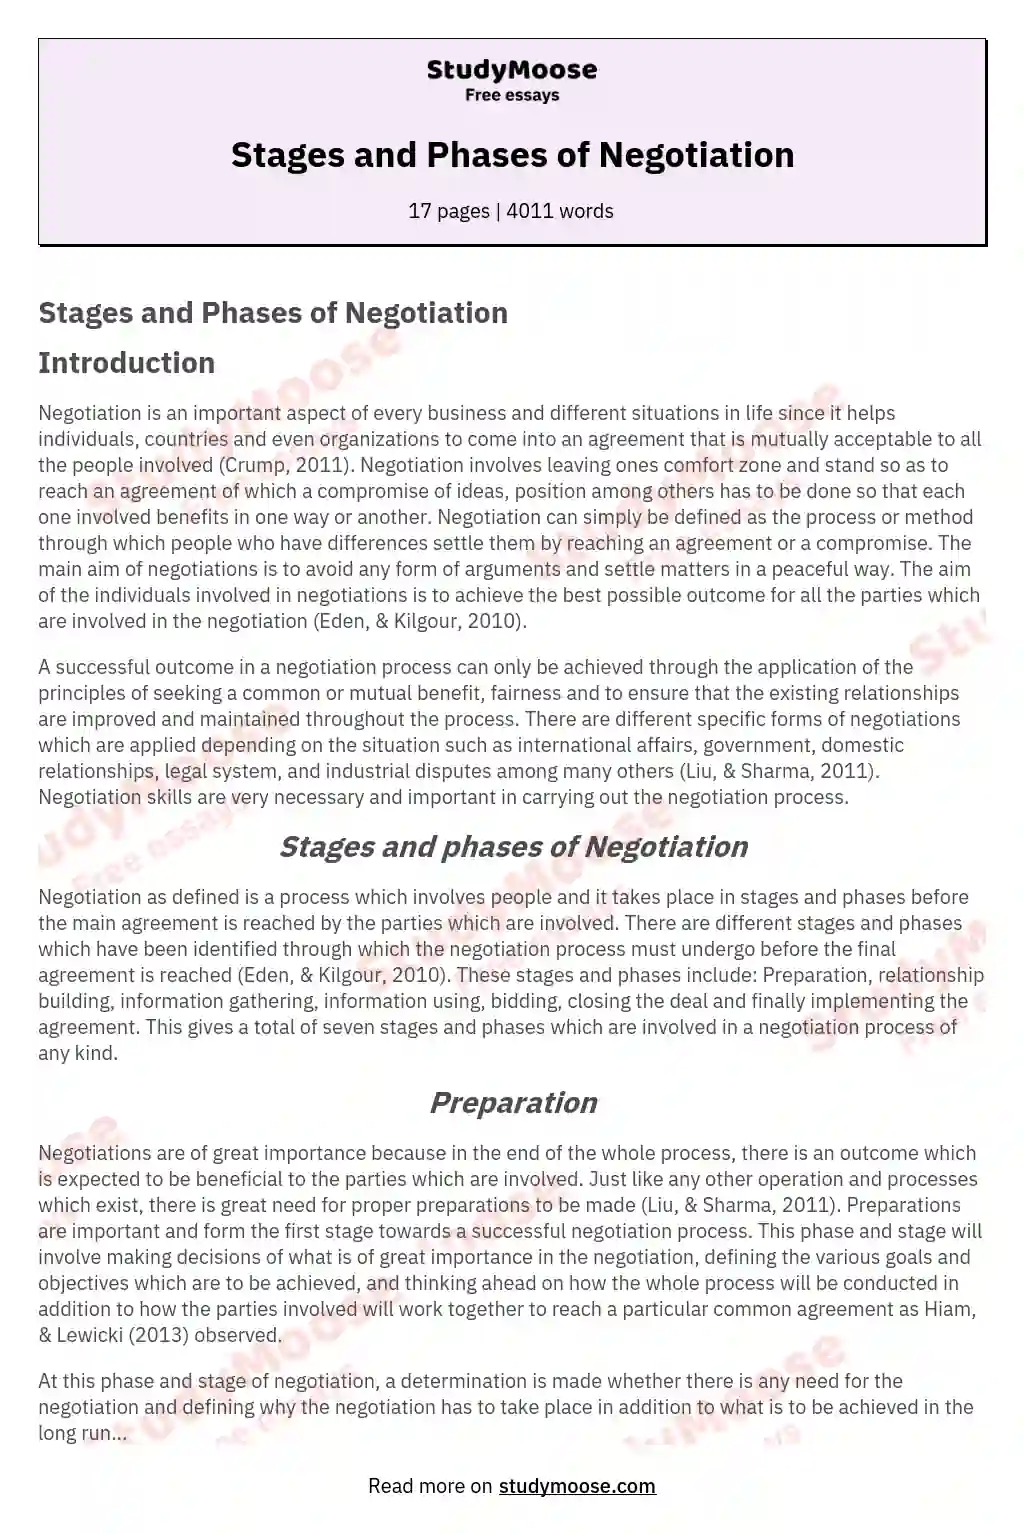 Stages and Phases of Negotiation essay